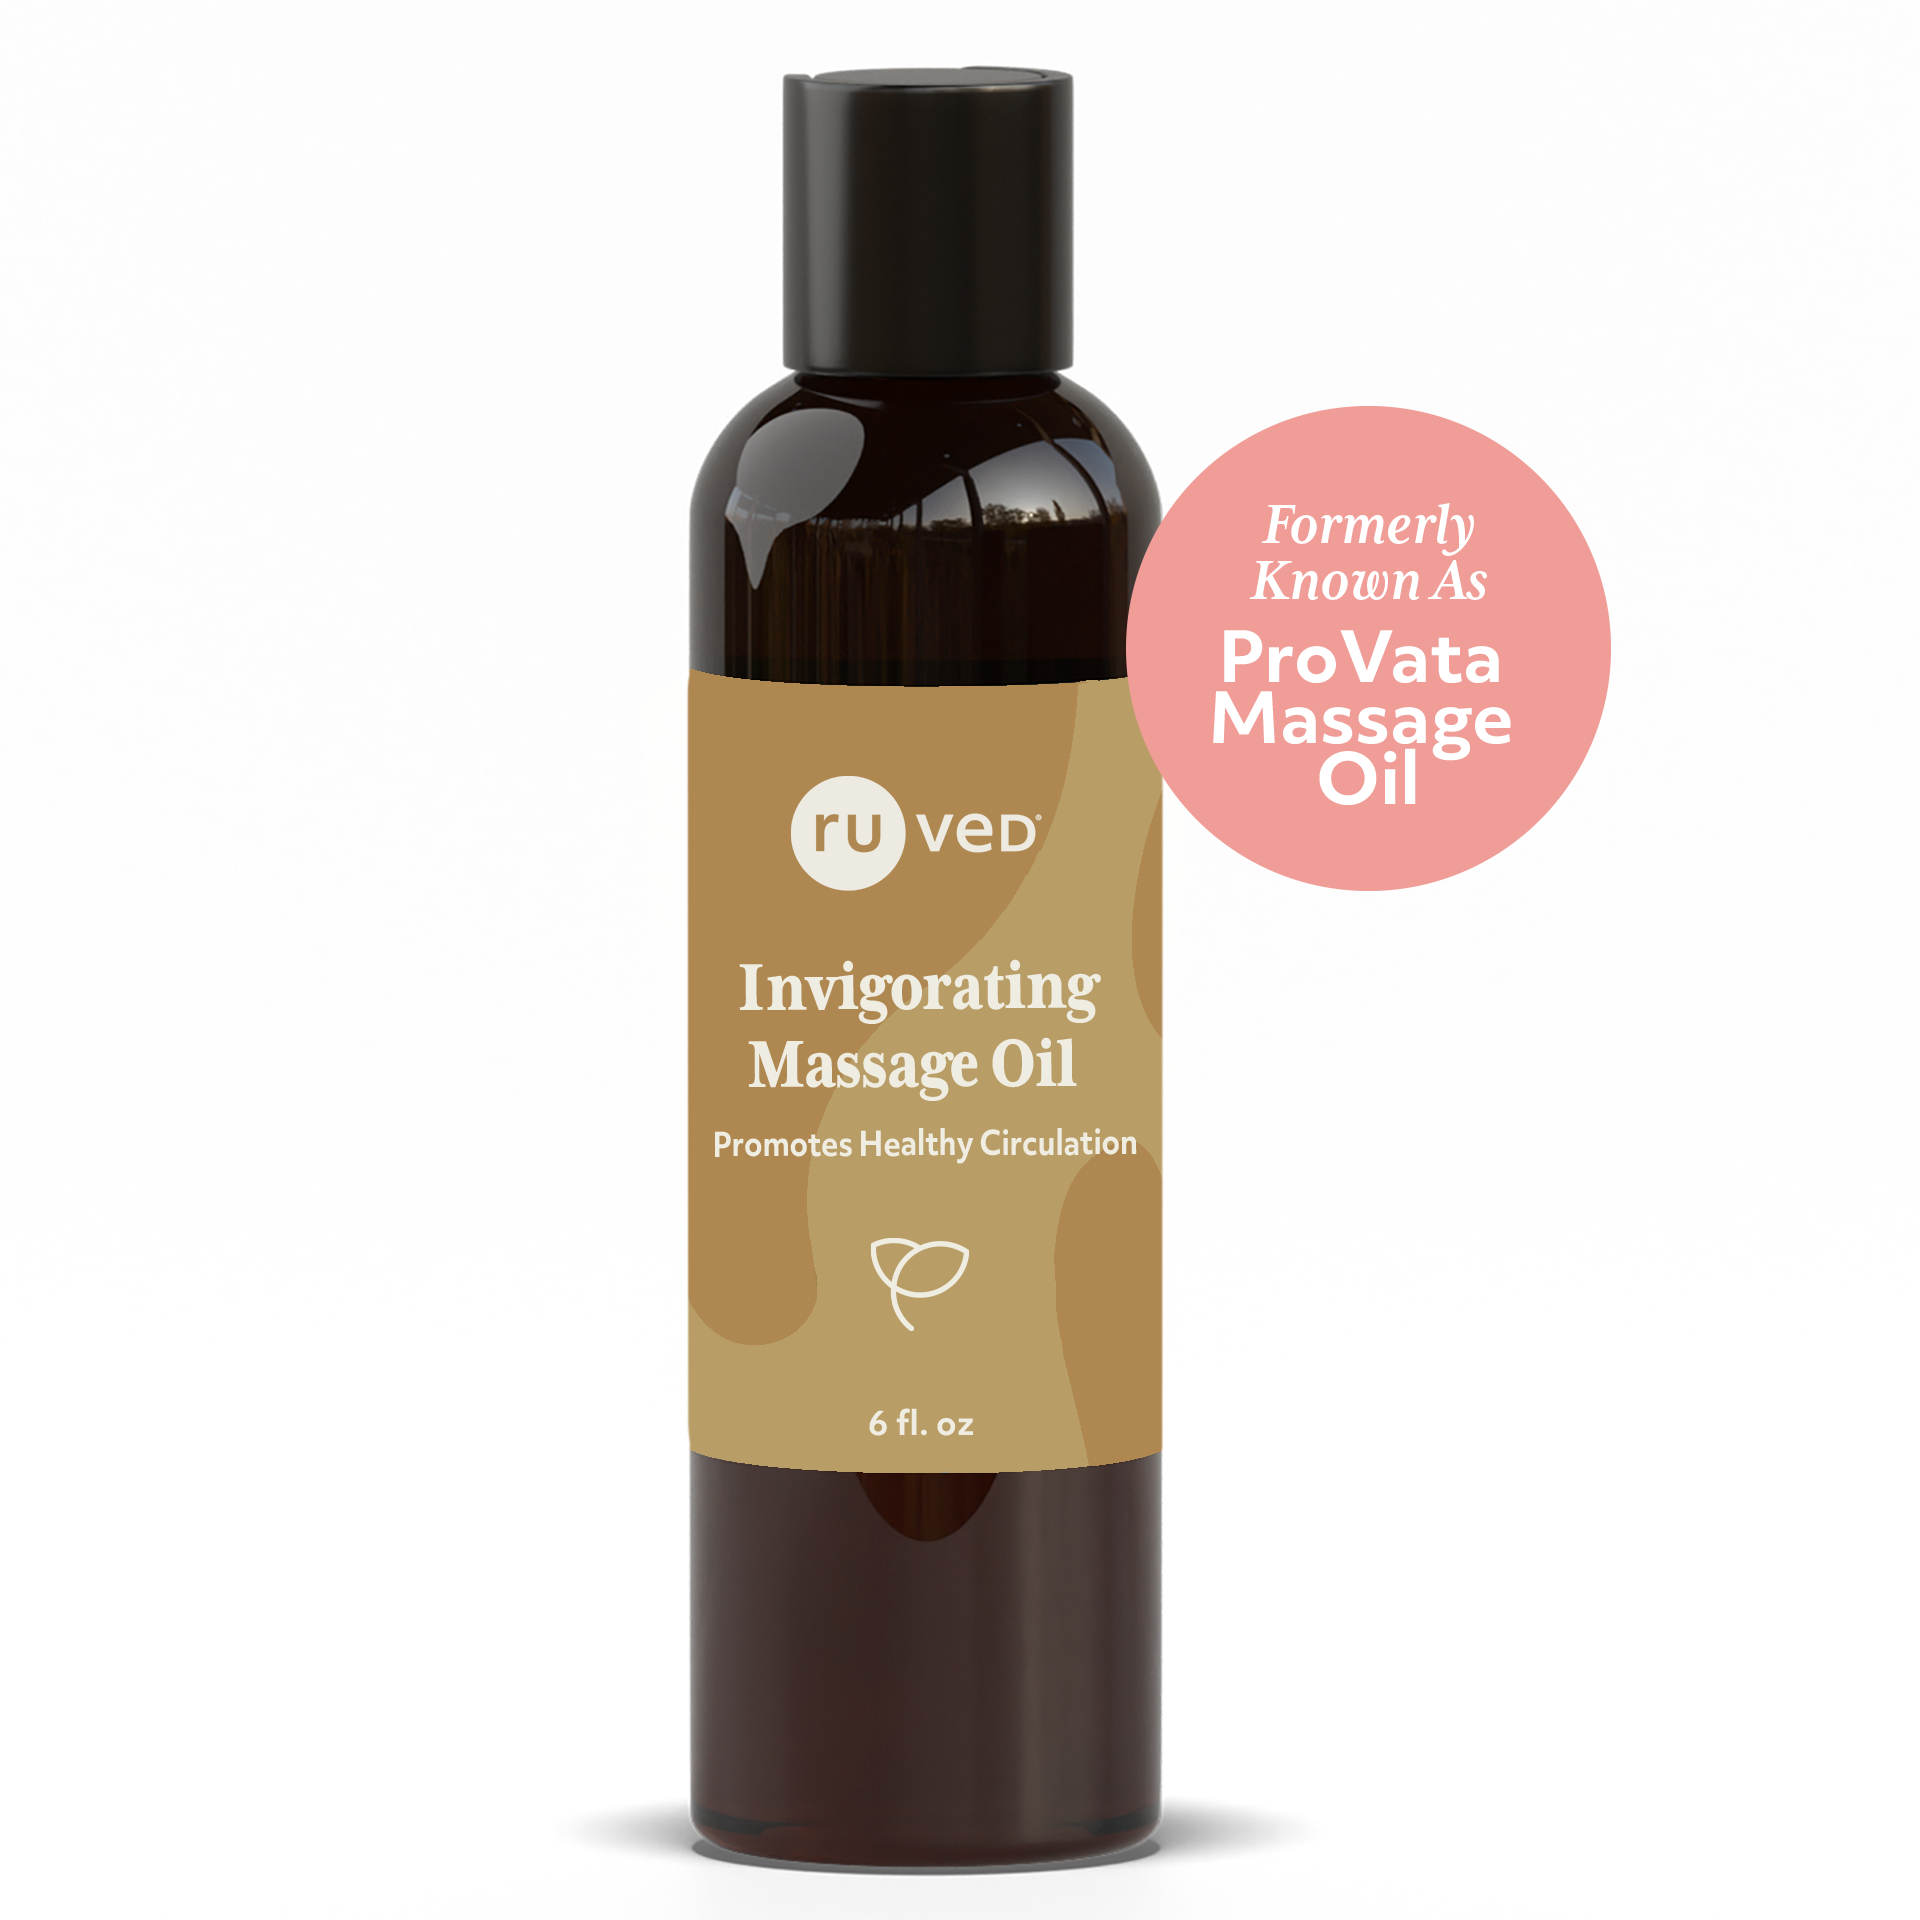 Invigorating Massage Oil - Luxurious blend of natural oils to Enhance Circulation on the skin, promoting spicy aromatics for a cold appearance. 100ml Bottle.